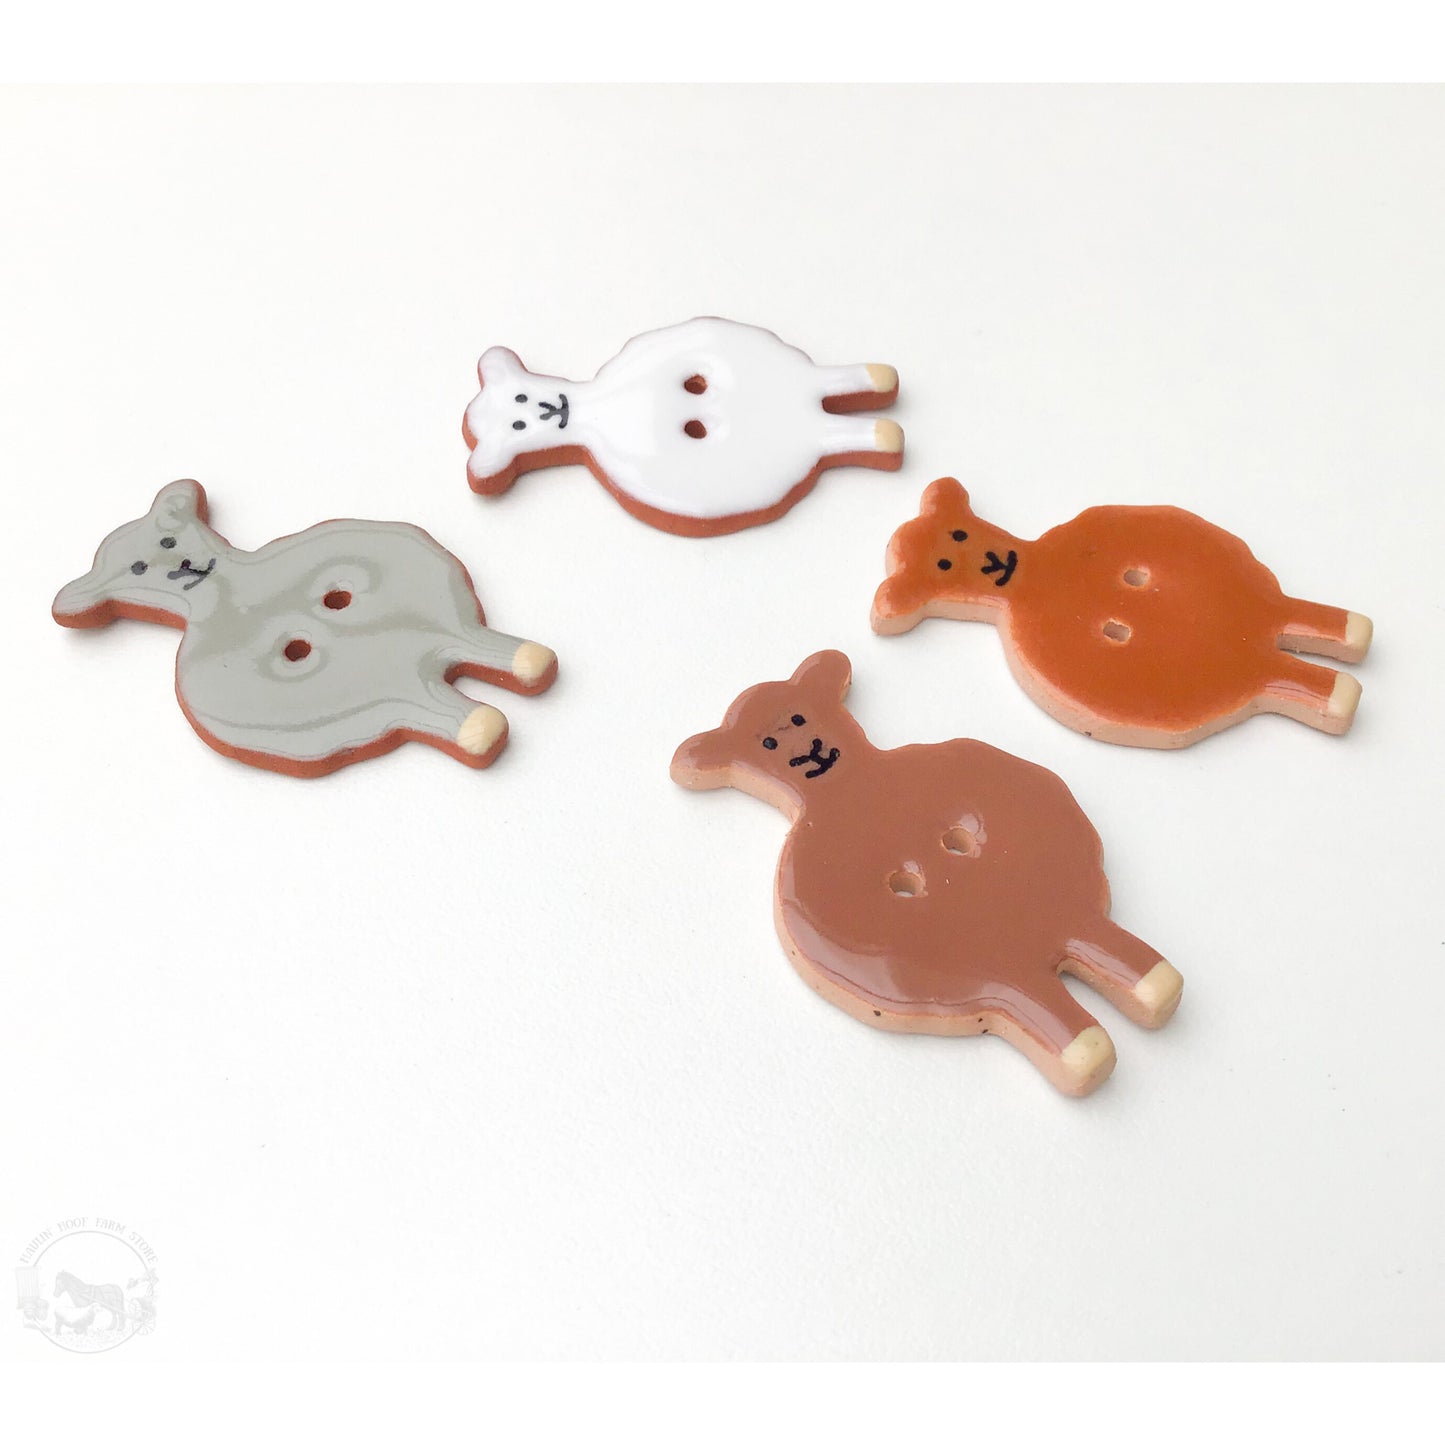 Wooly Friends Button Collection: Artisan Ceramic Sheep Buttons - Buttons for Sheep Lovers (ws-271)